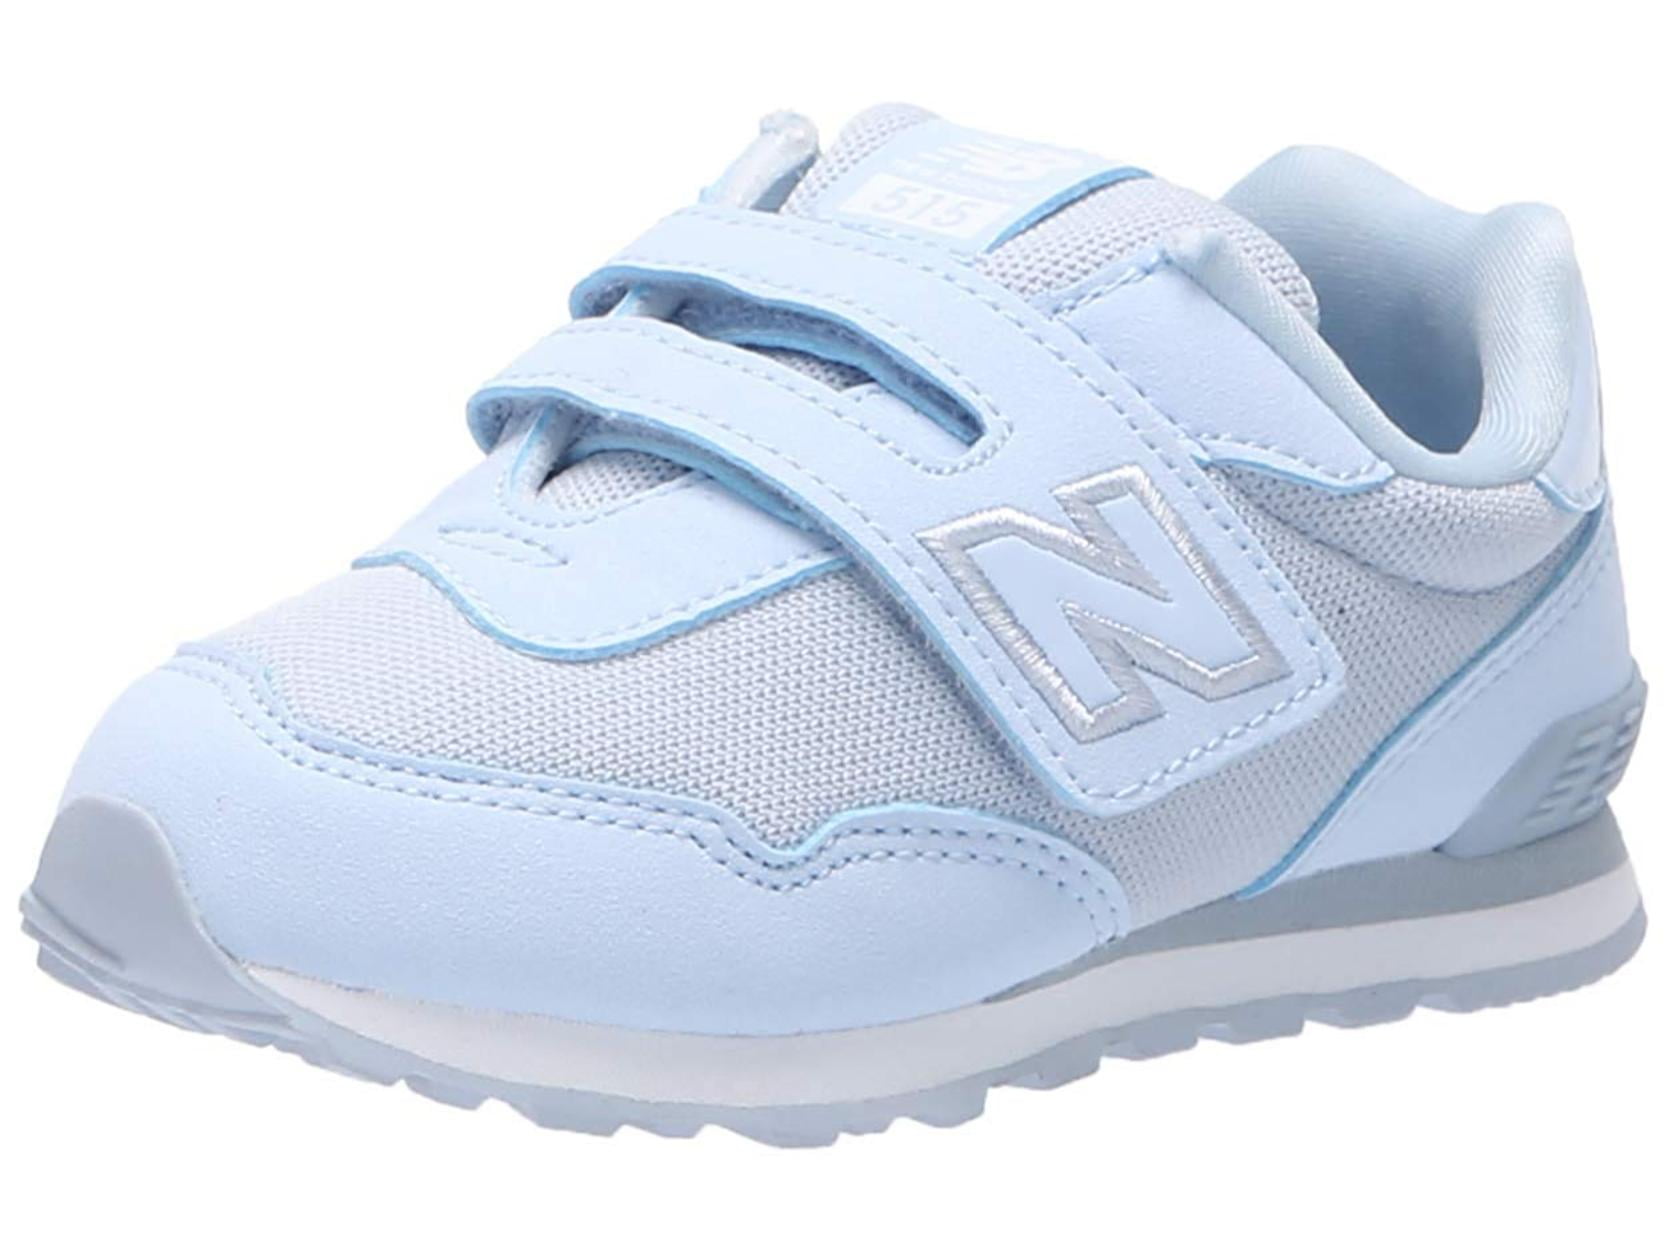 buy new balance shoes canada